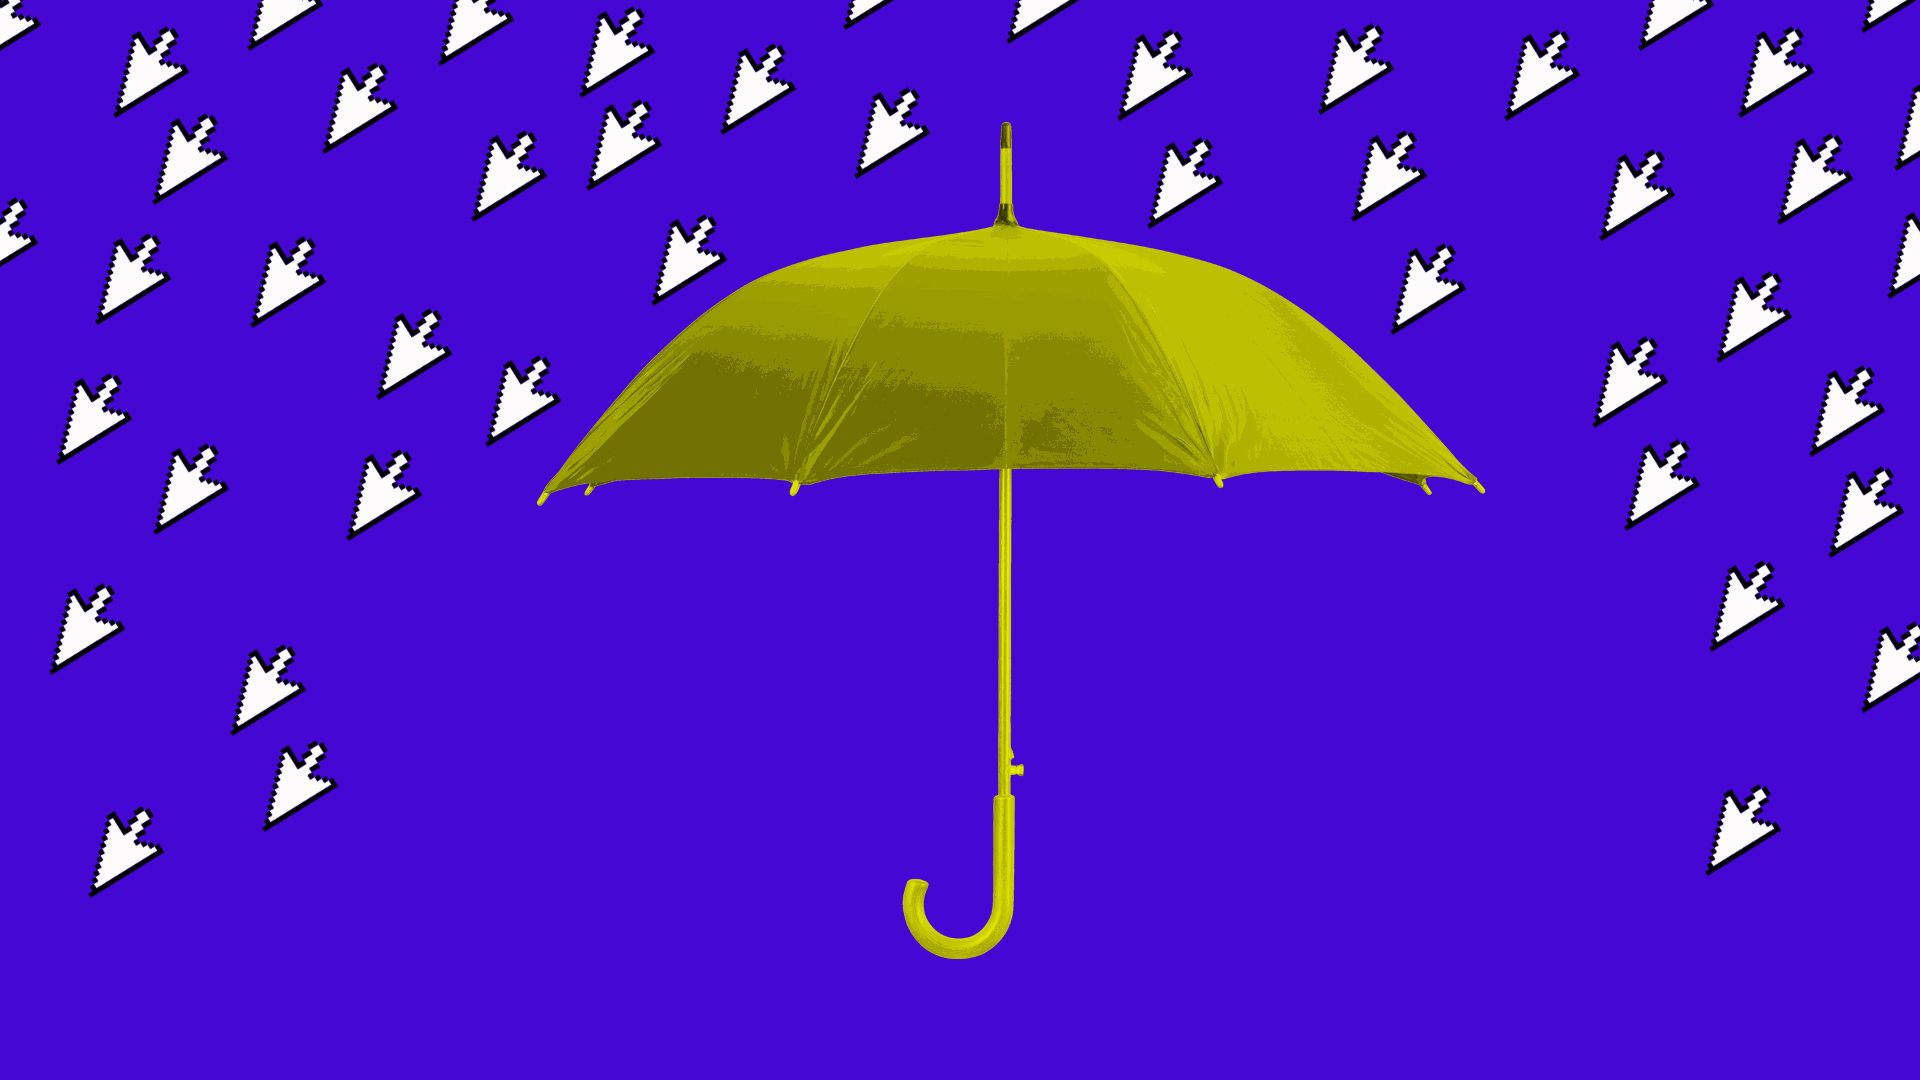 Illustration shows umbrella blocking out mouse cursors as rain drops before blue background.